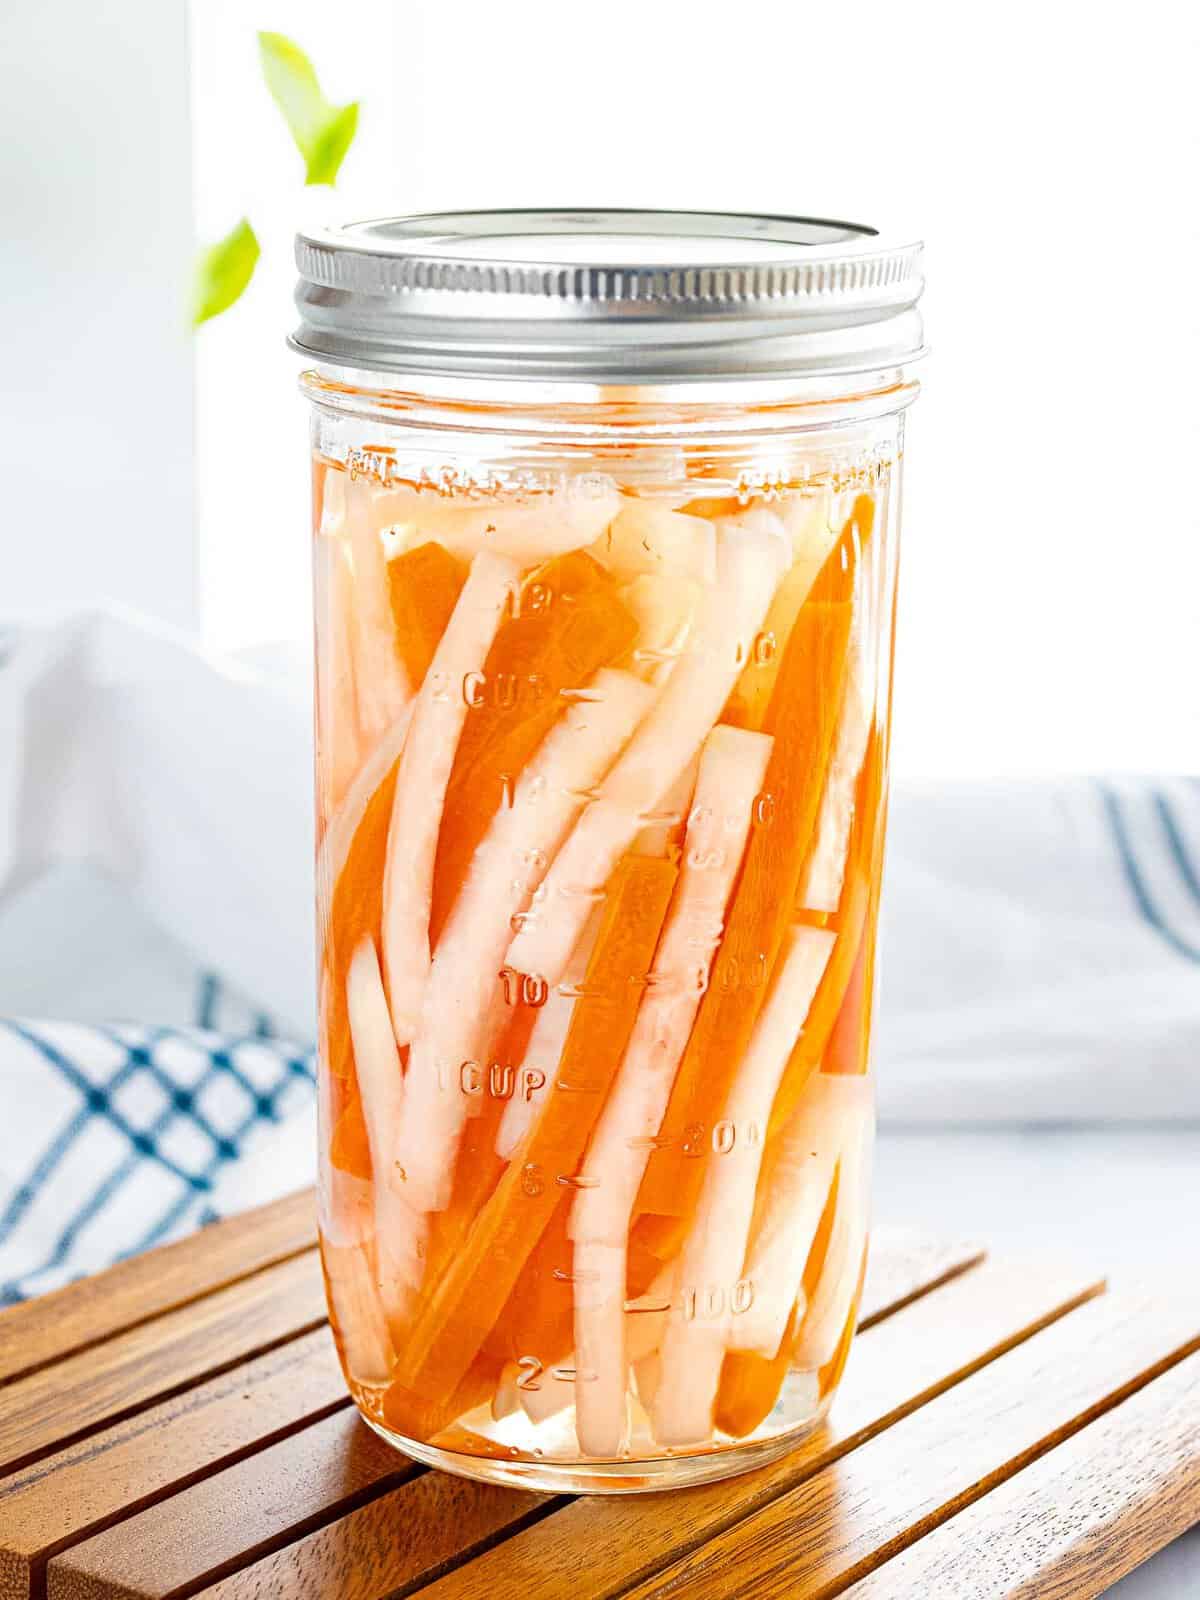 A jar of Vietnamese pickled carrots and daikon or do chua.